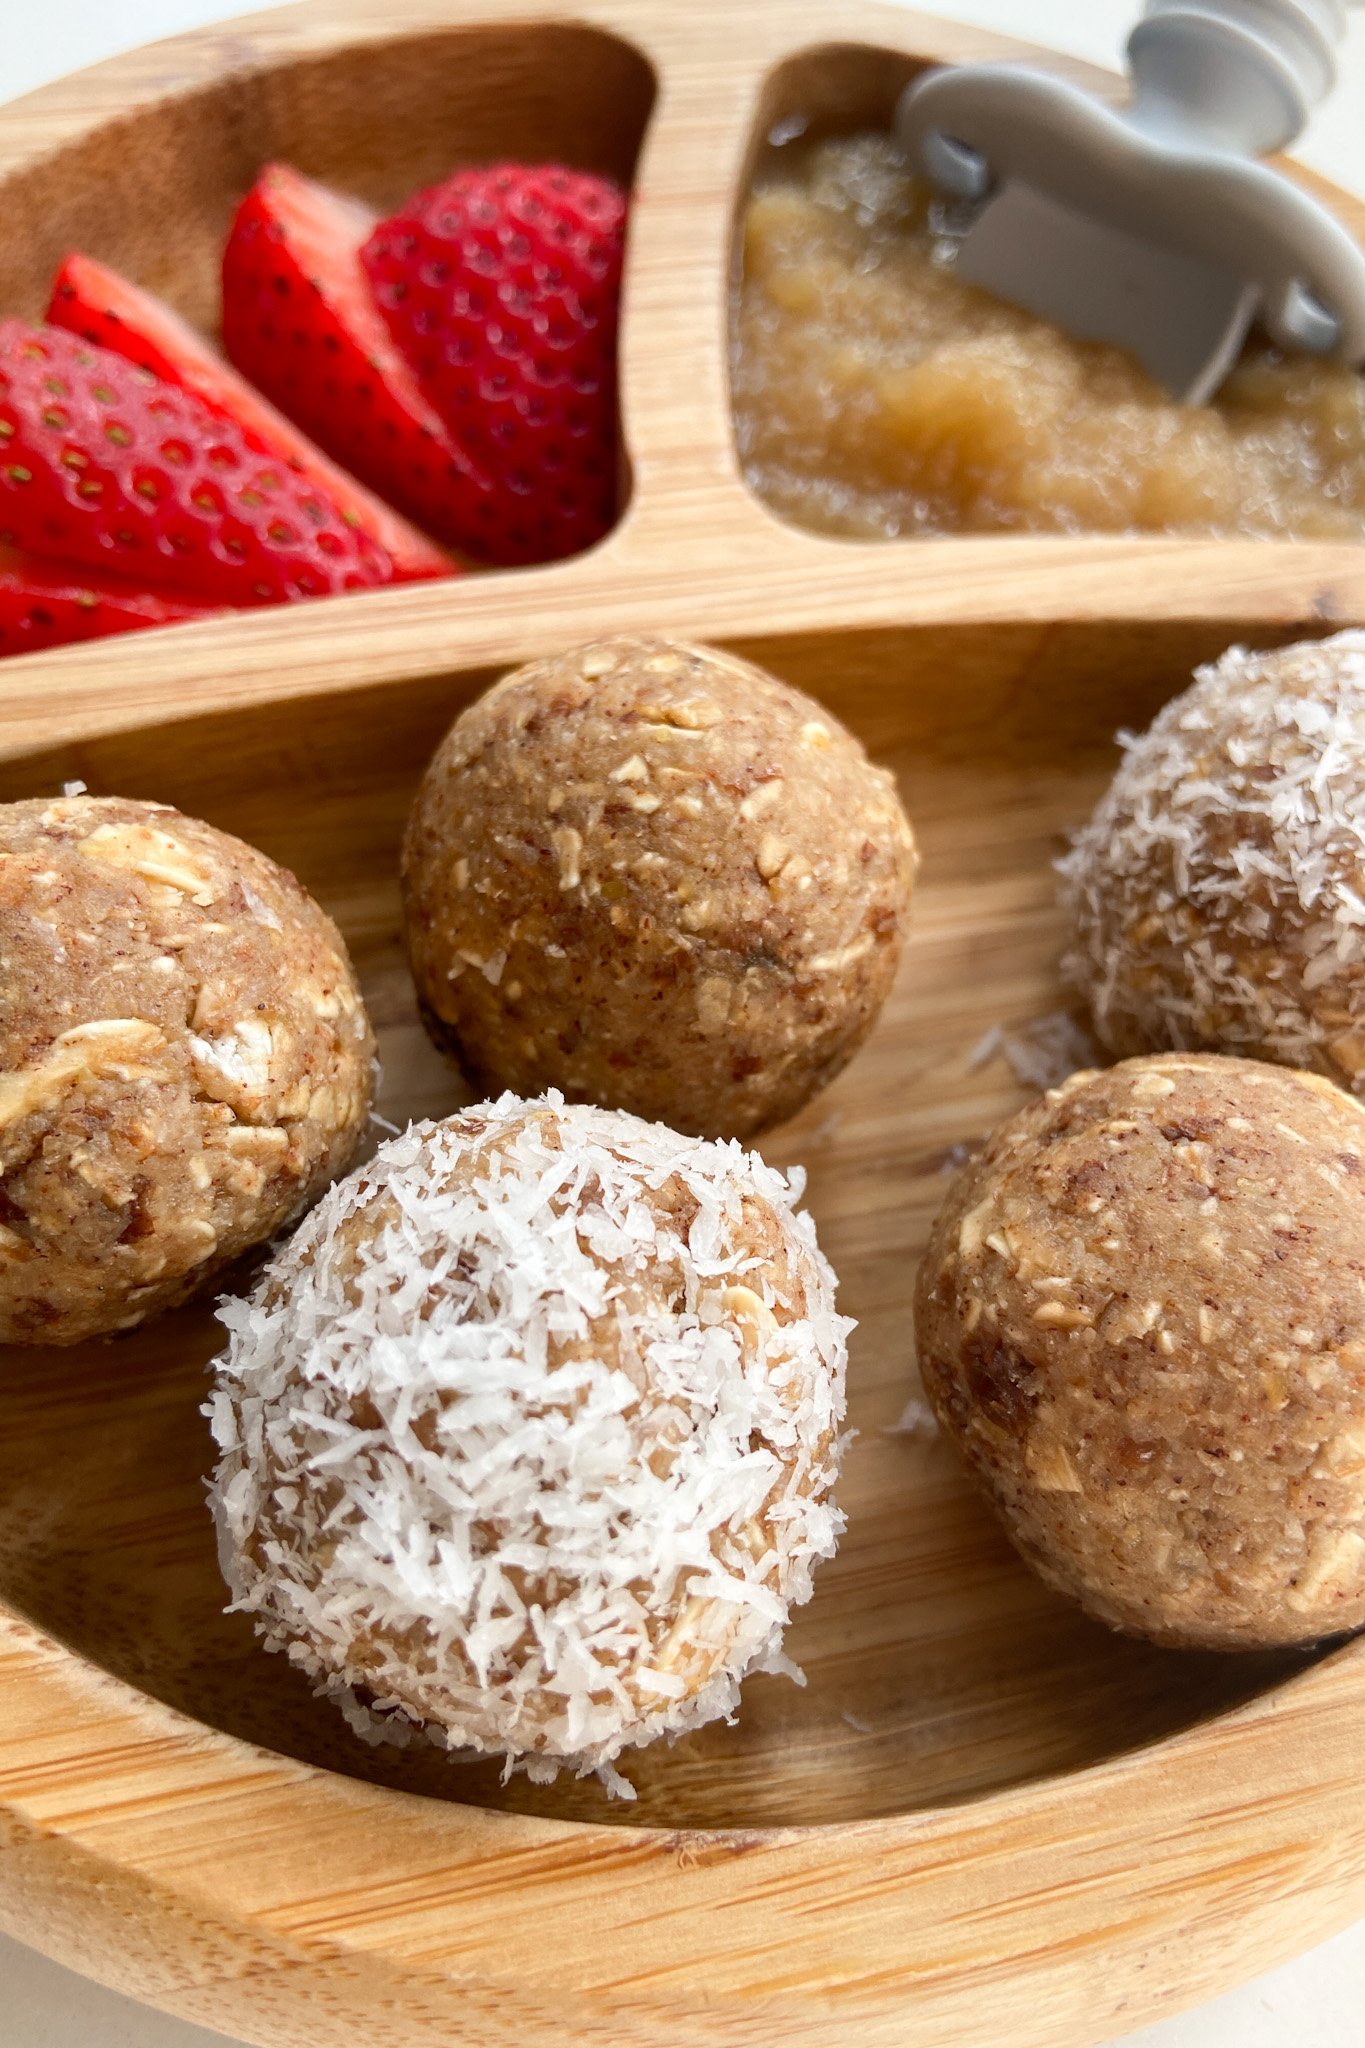 Apple pie bliss balls served with sliced strawberries and applesauce